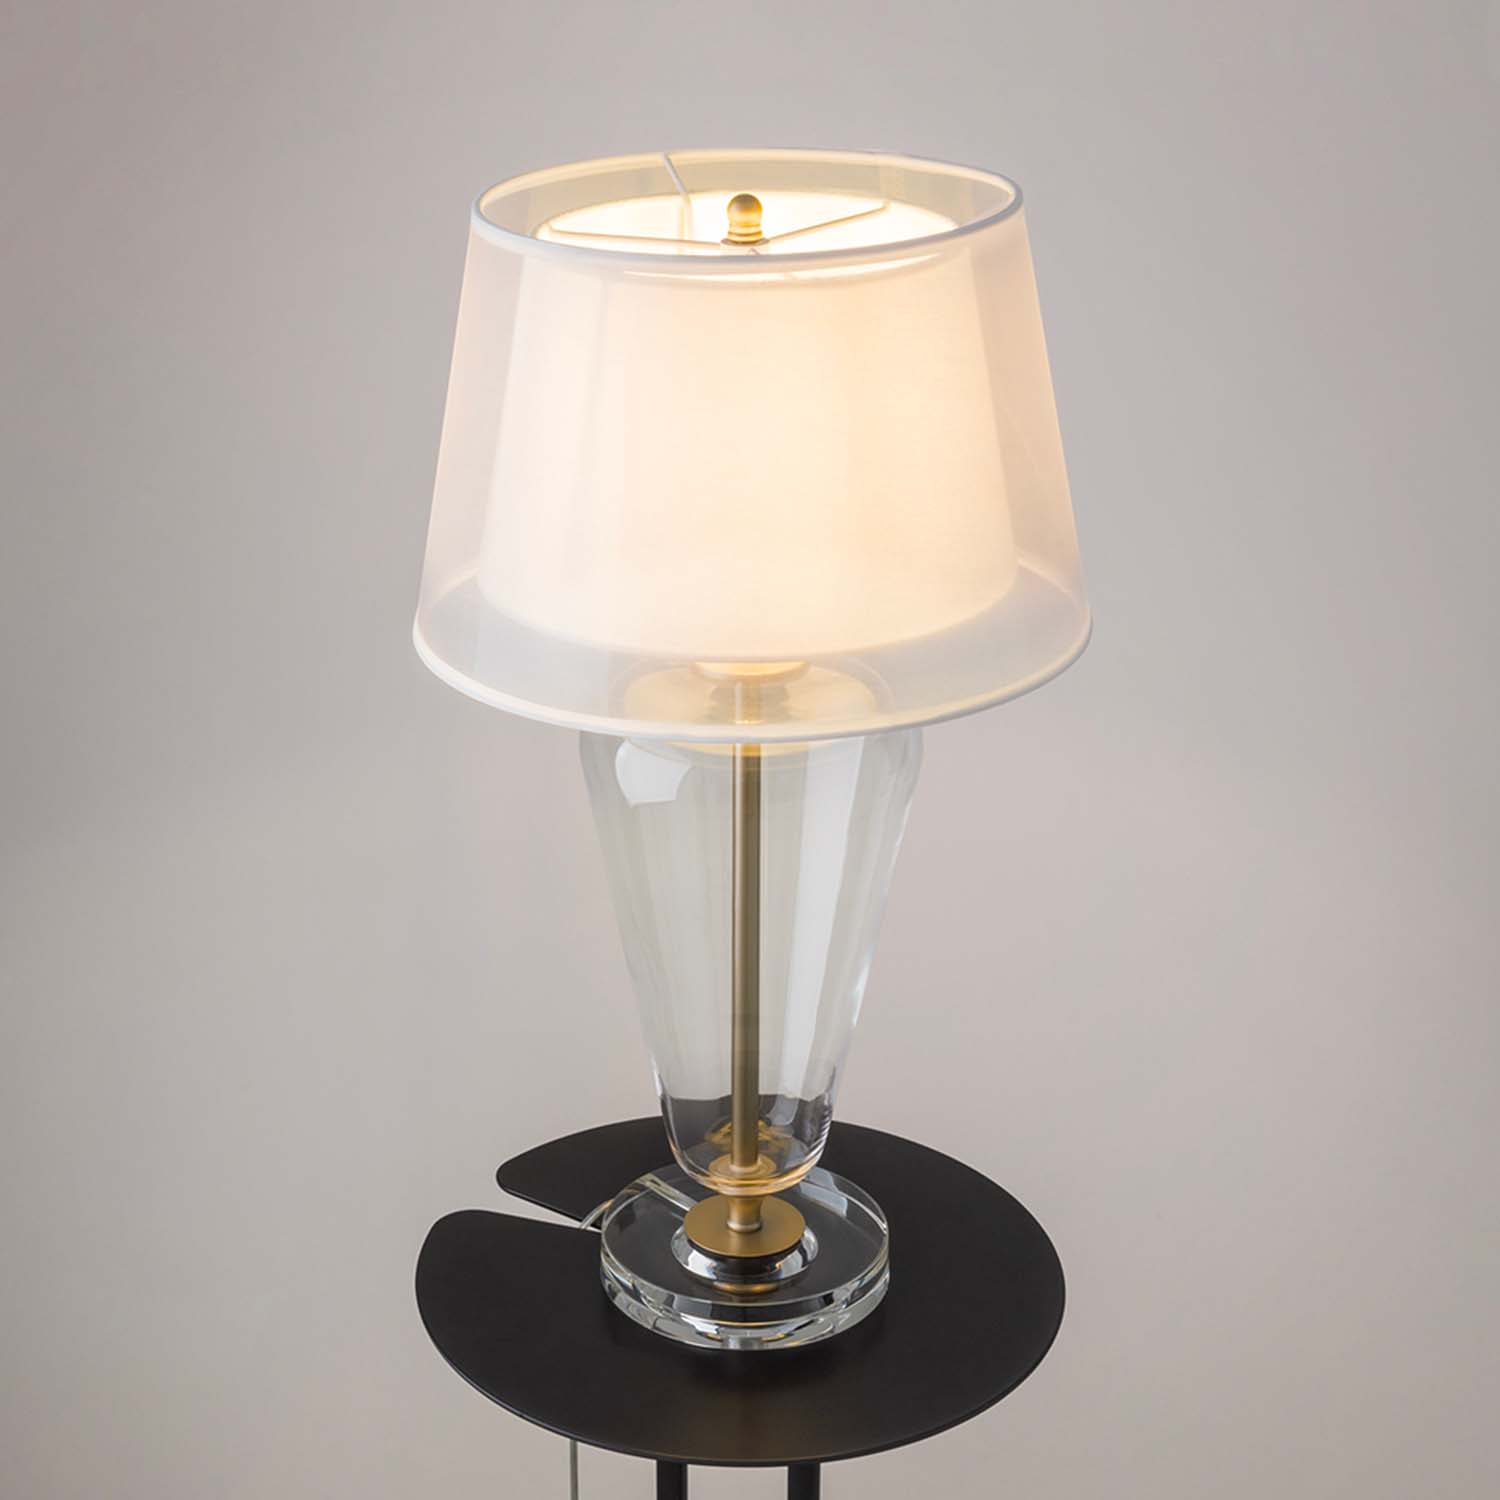 TABLE VERRE - Vintage glass table lamp, fabric lampshade